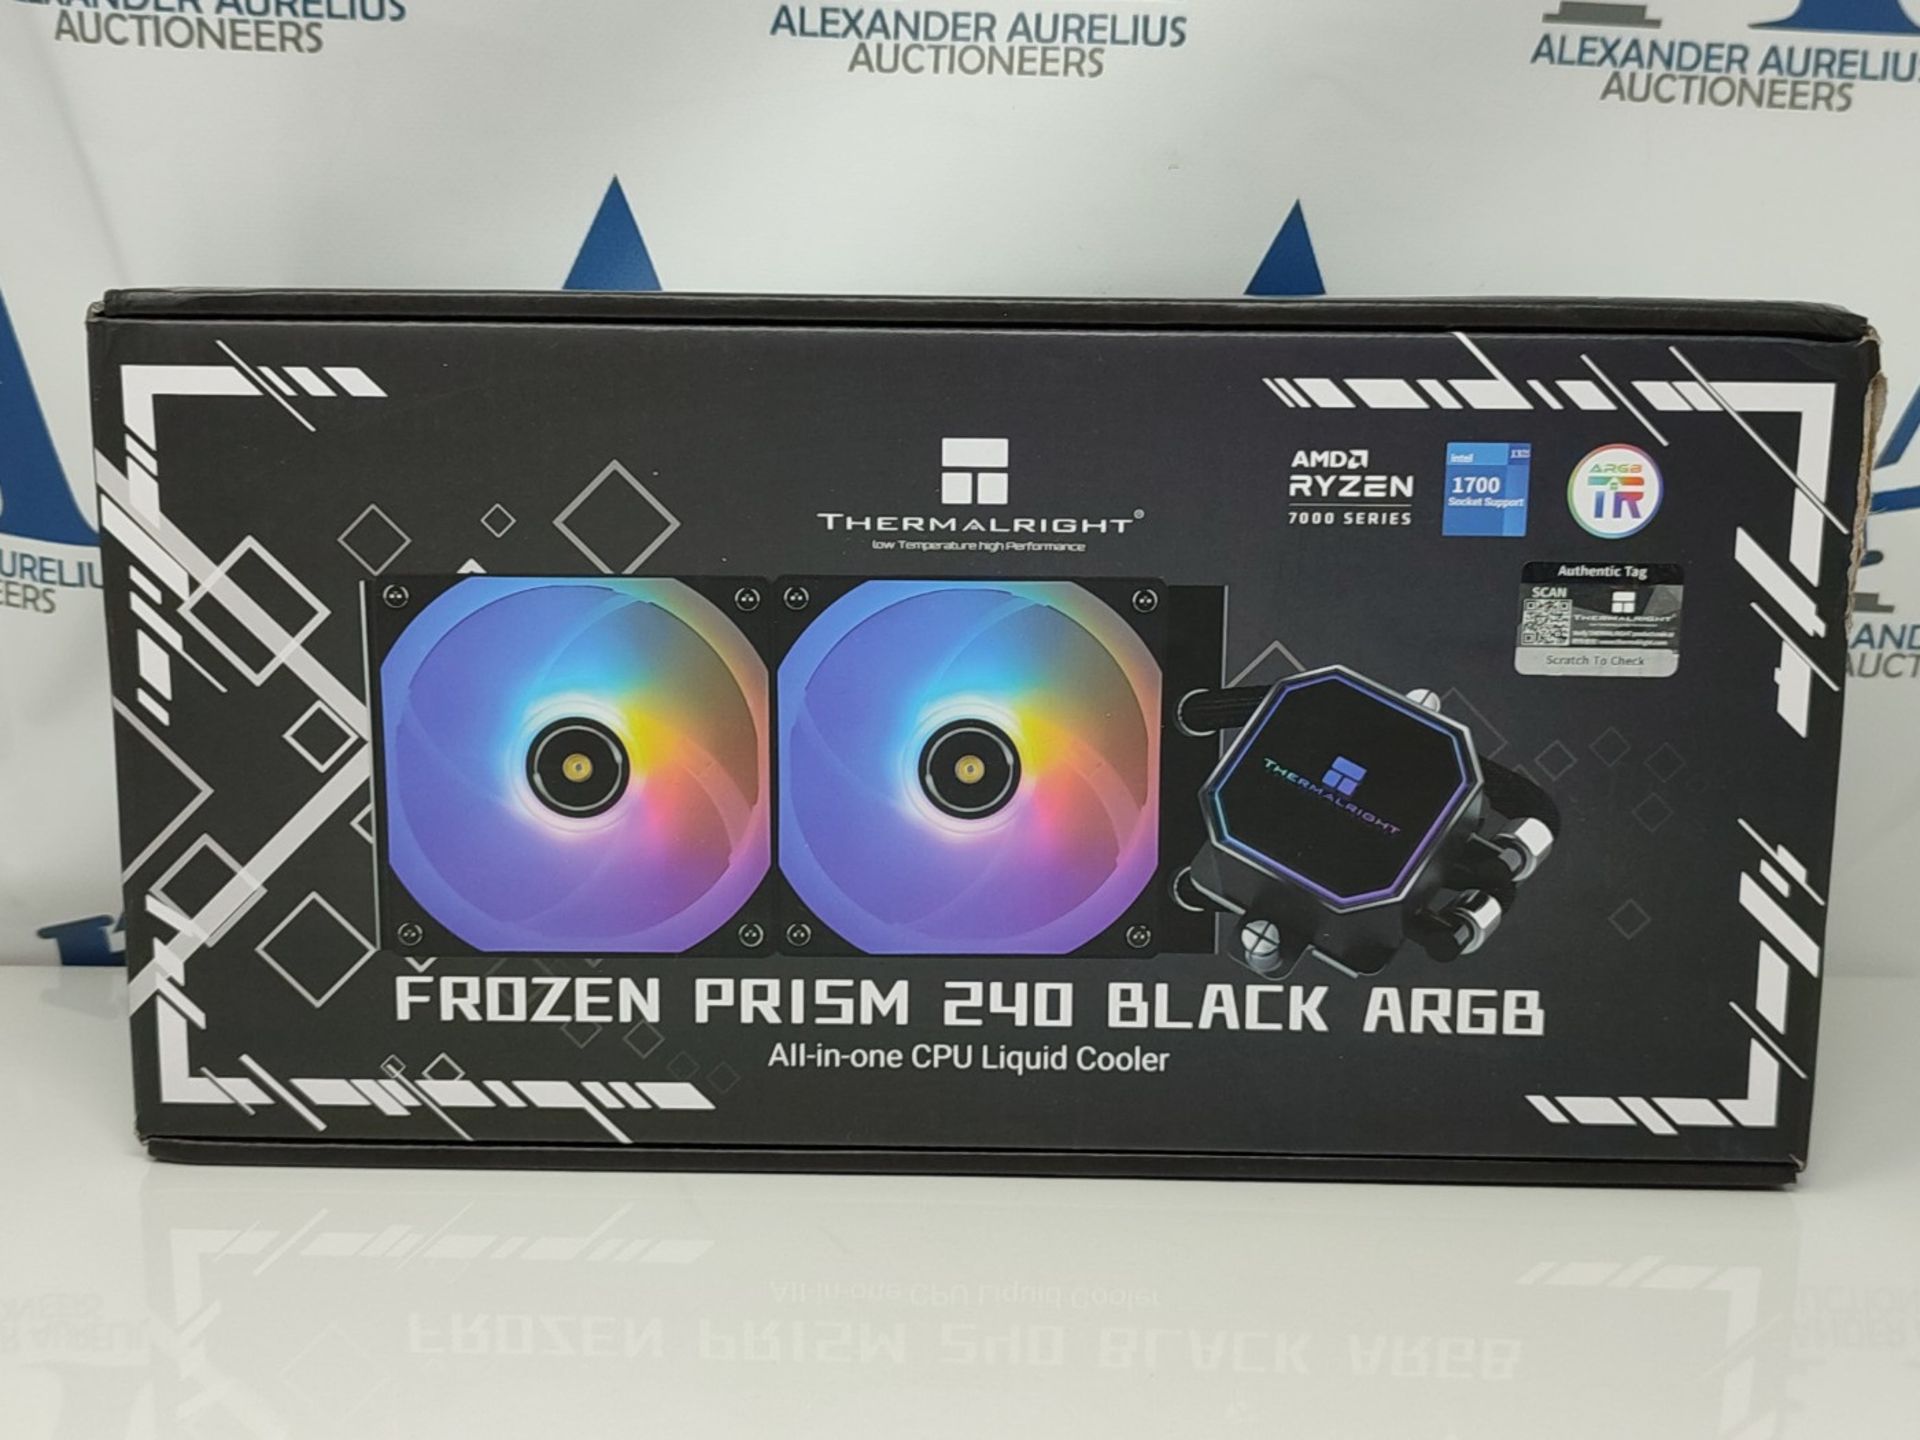 Thermalright Frozen Prism 240 Black ARGB CPU Water Cooler With Dual PWM Fans, Water Pu - Image 5 of 15